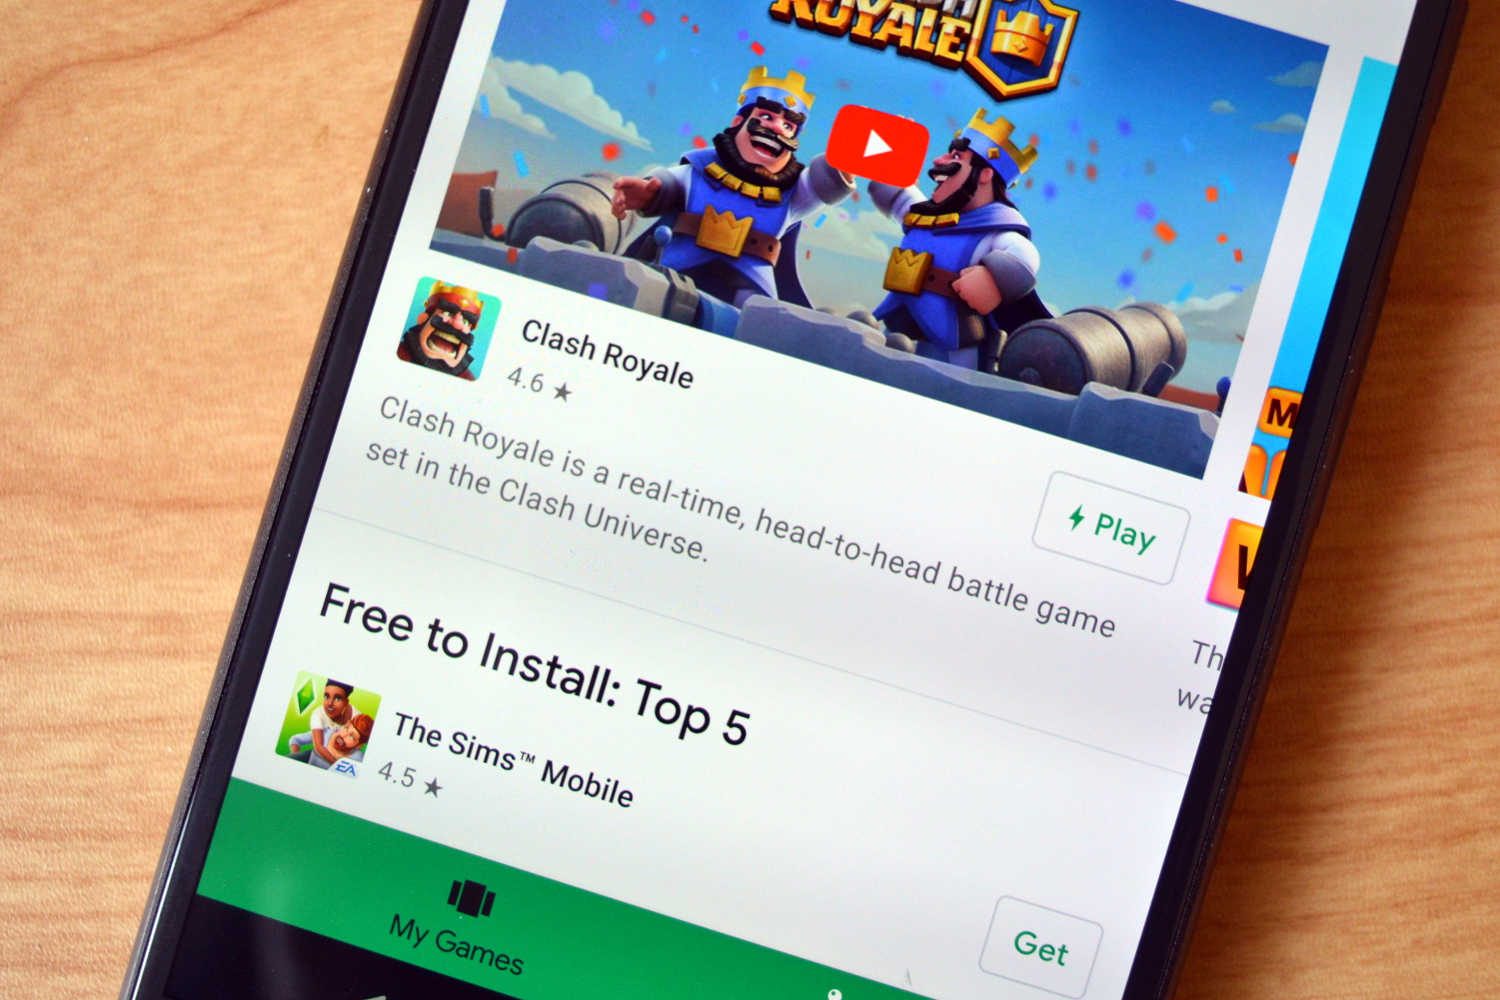 Google Play Games Beta for PC - Everythings Need to Know- News